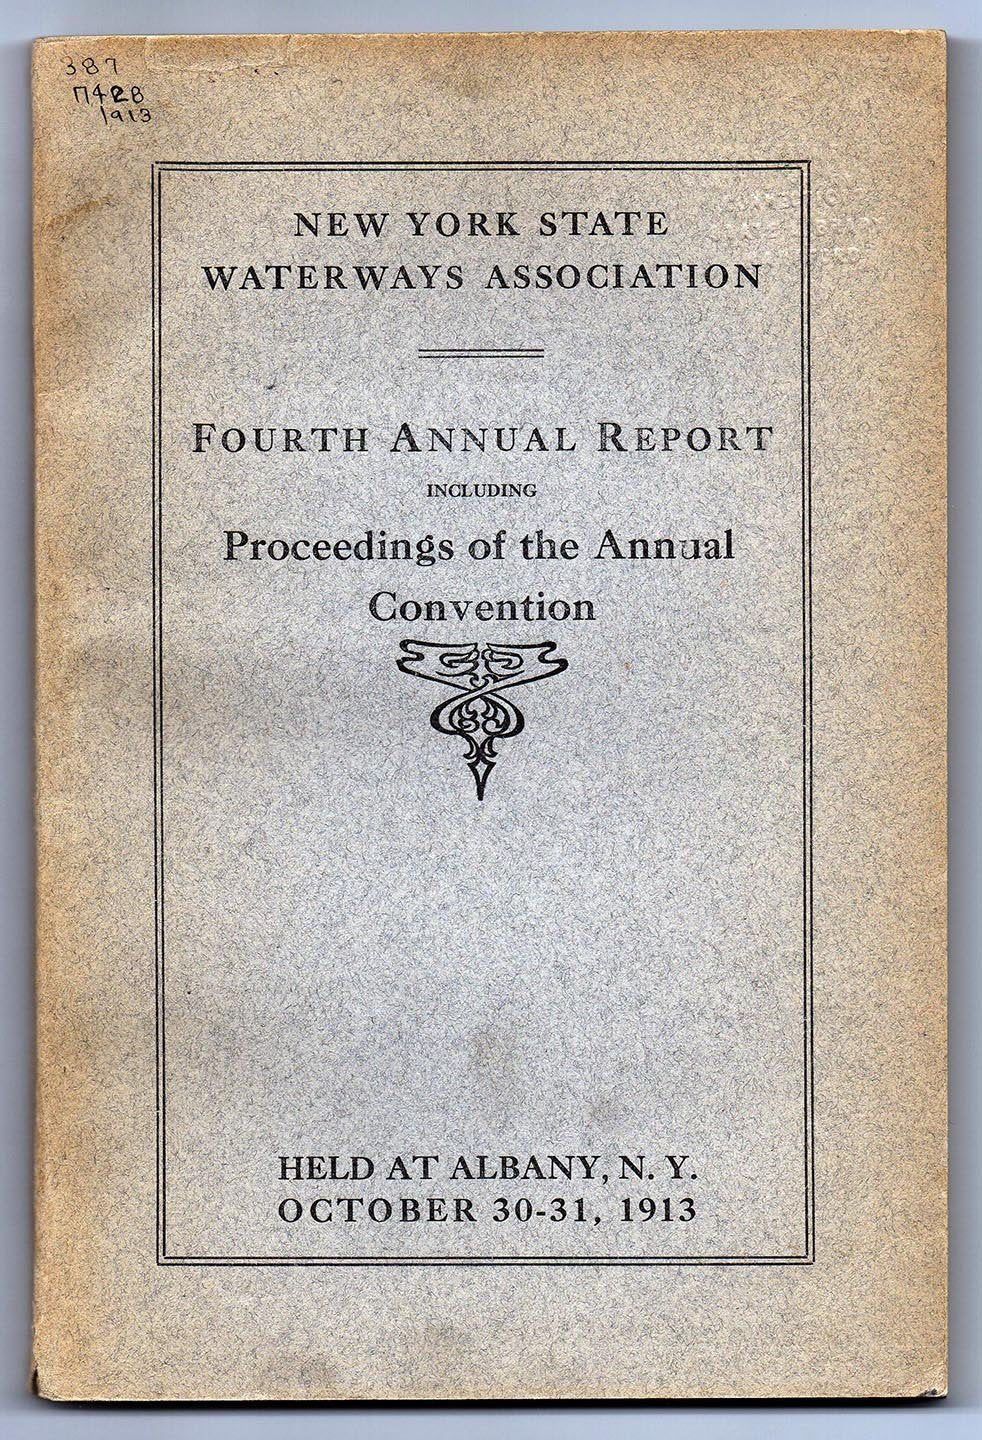 New York State Waterways Association Fourth Annual Report Including Proceedings of the Annual Convention Held at Albany, N.Y. October 30-31, 1913